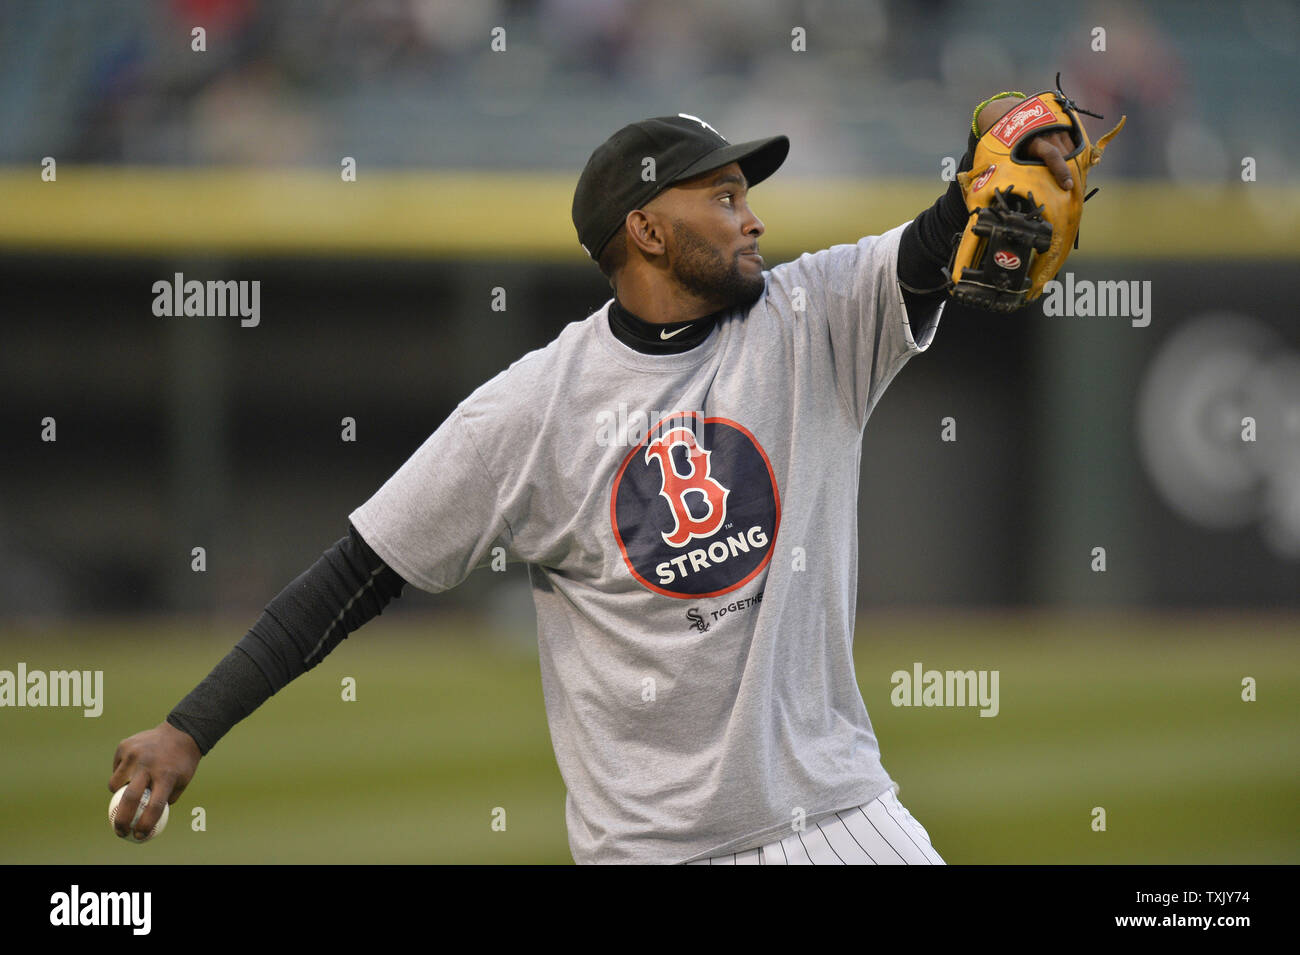 Chicago White Sox shortstop Alexei Ramirez wears a Boston Strong tee shirt  as he warms up before the game against the Boston Red Sox at U.S. Cellular  Field on April 15, 2014